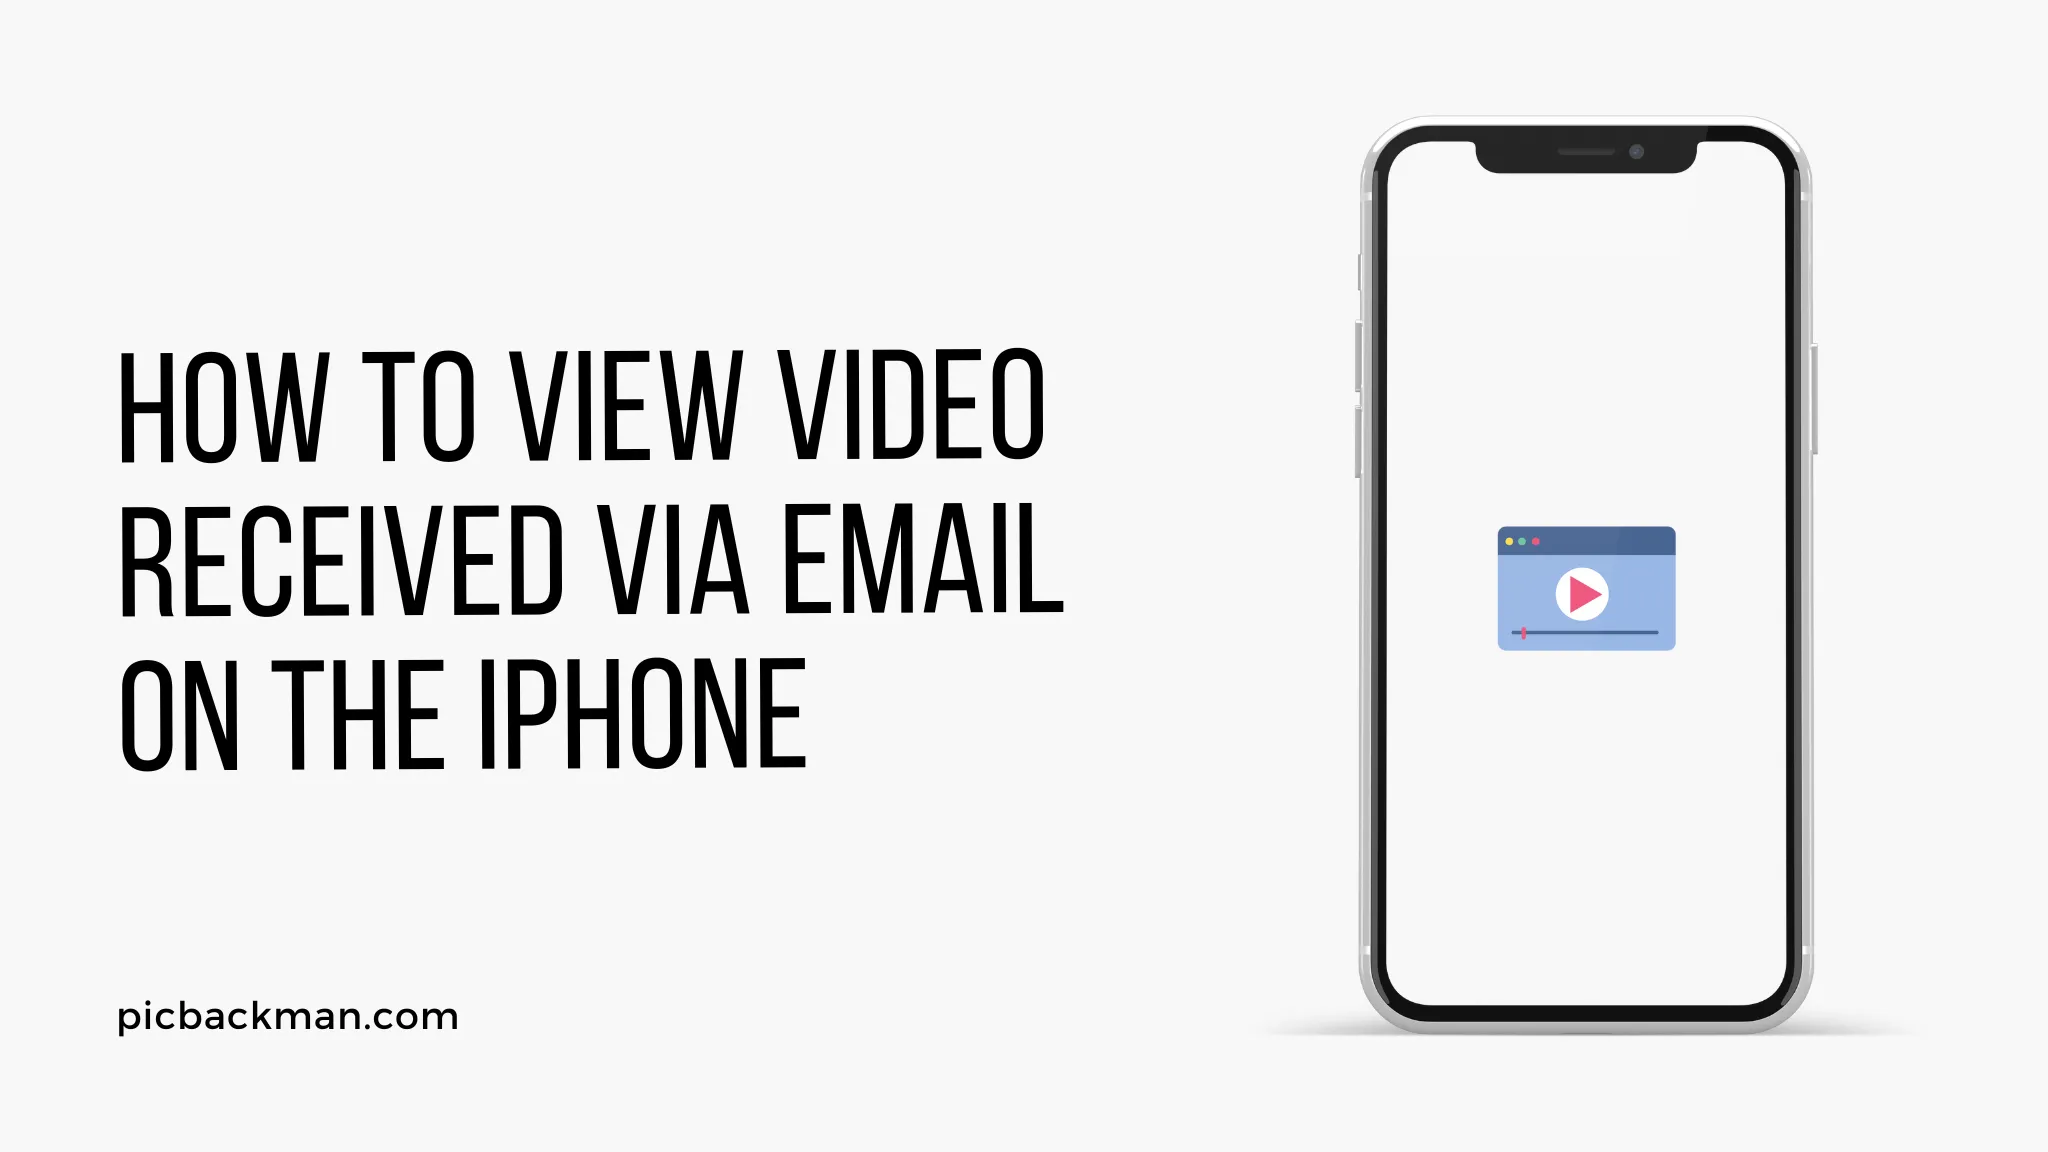 How to View Video Received via Email on the iPhone?